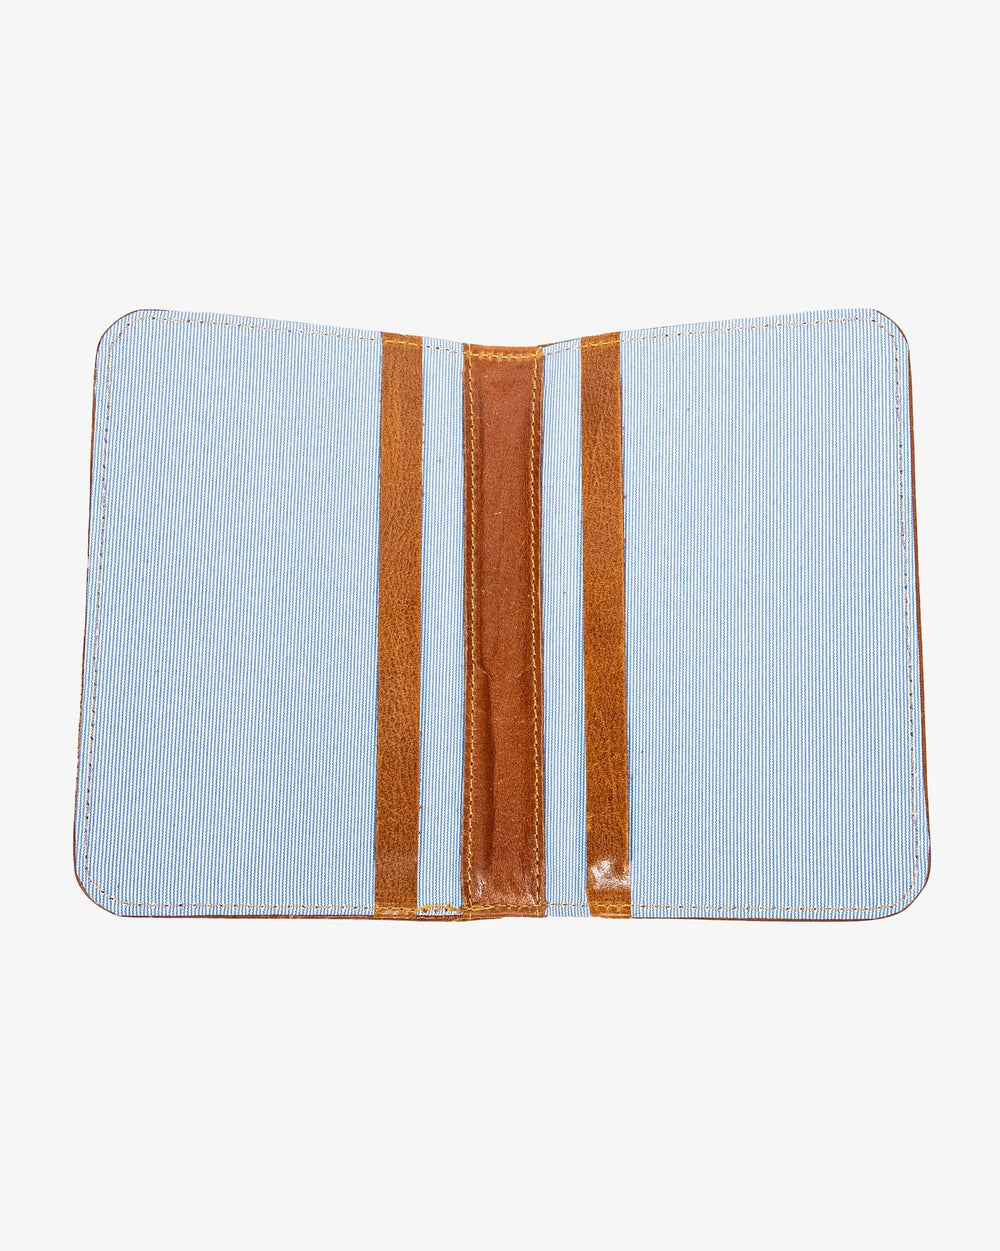 The flat detail view of the Southern Tide Skipjack Golf Scorecard Holder by Southern Tide - Navy